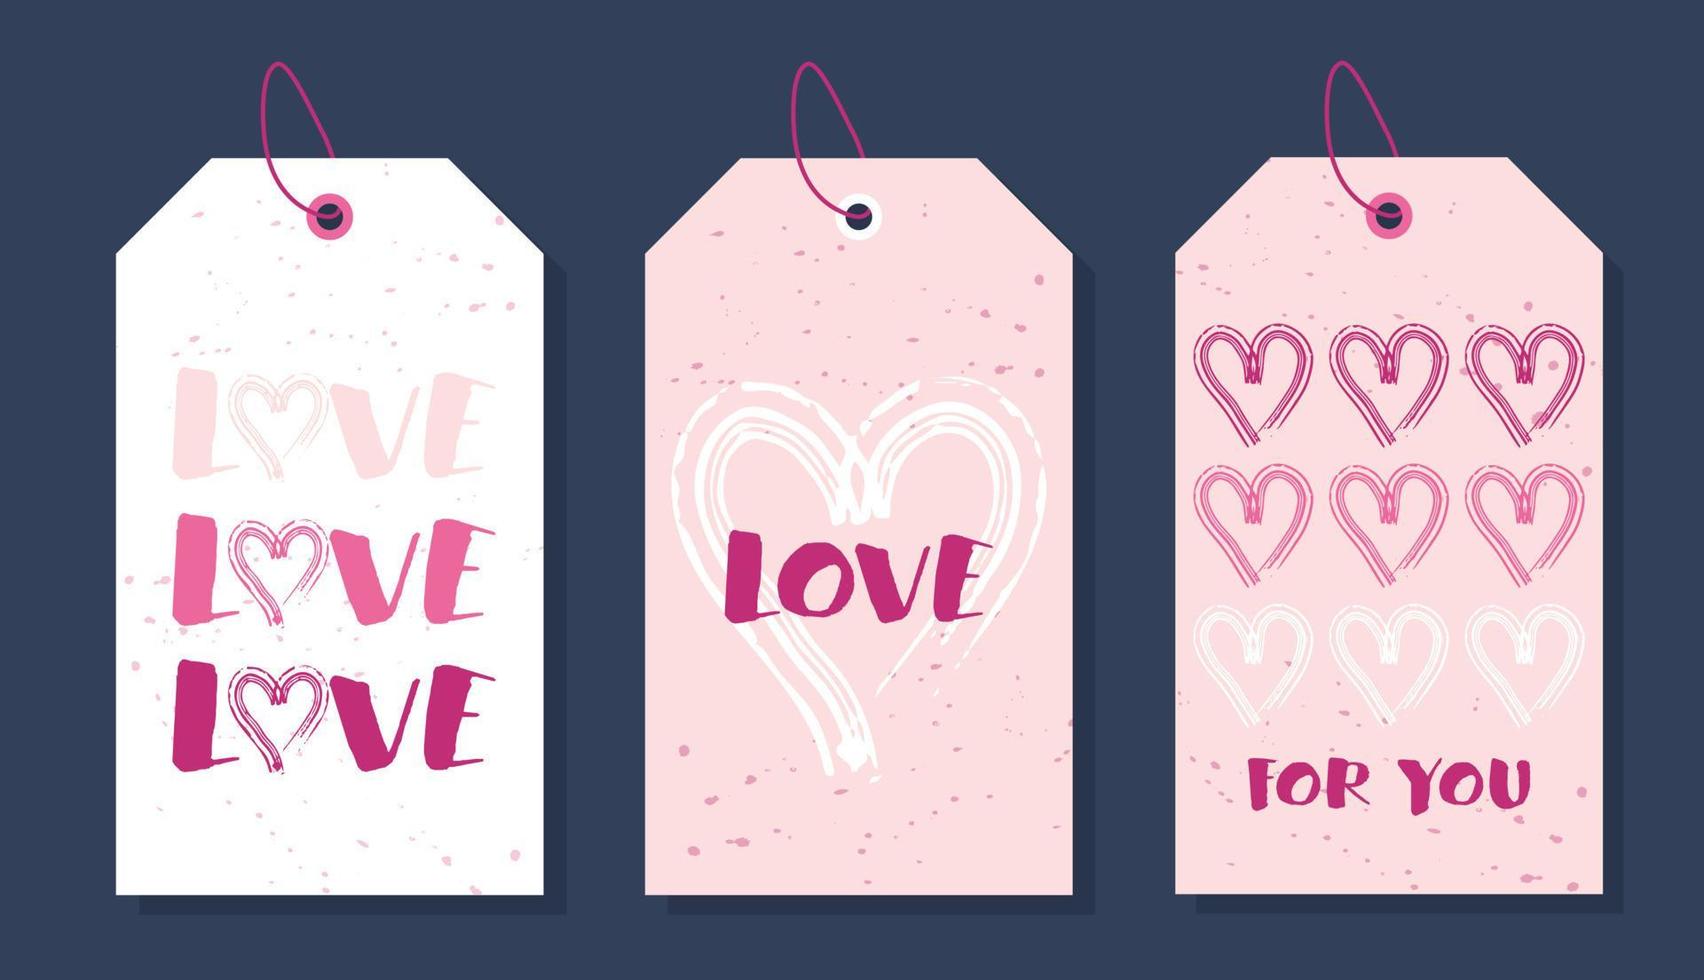 Hand drawn vector set of gift tags with hearts. Love and romantic tags isolated on dark background. Romantic labels for decorative design. Template for holidays and wedding designs.